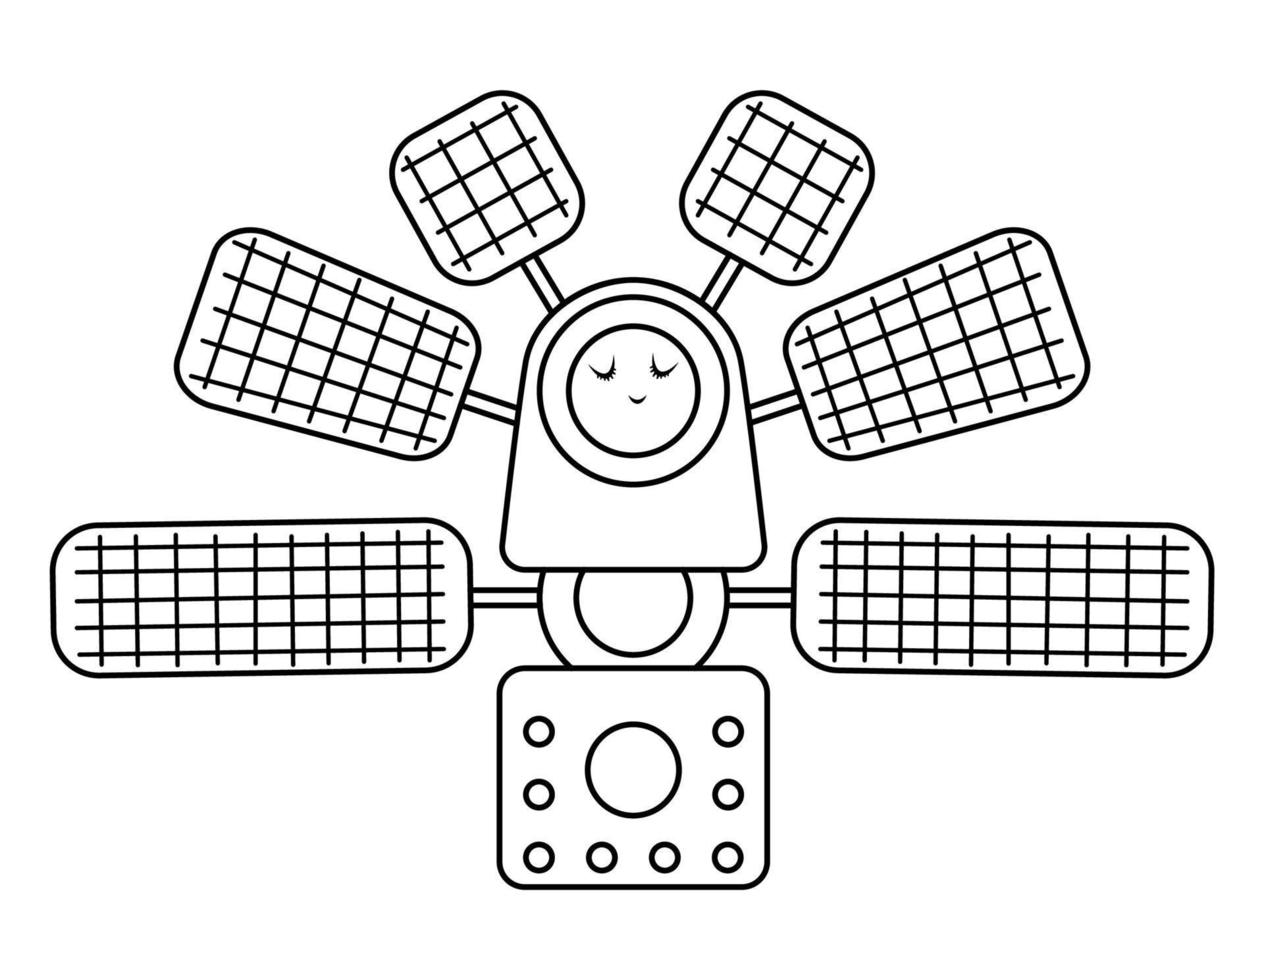 Vector black and white space station illustration for children. Outline smiling technics icon isolated on white background. Space exploration coloring page for kids.